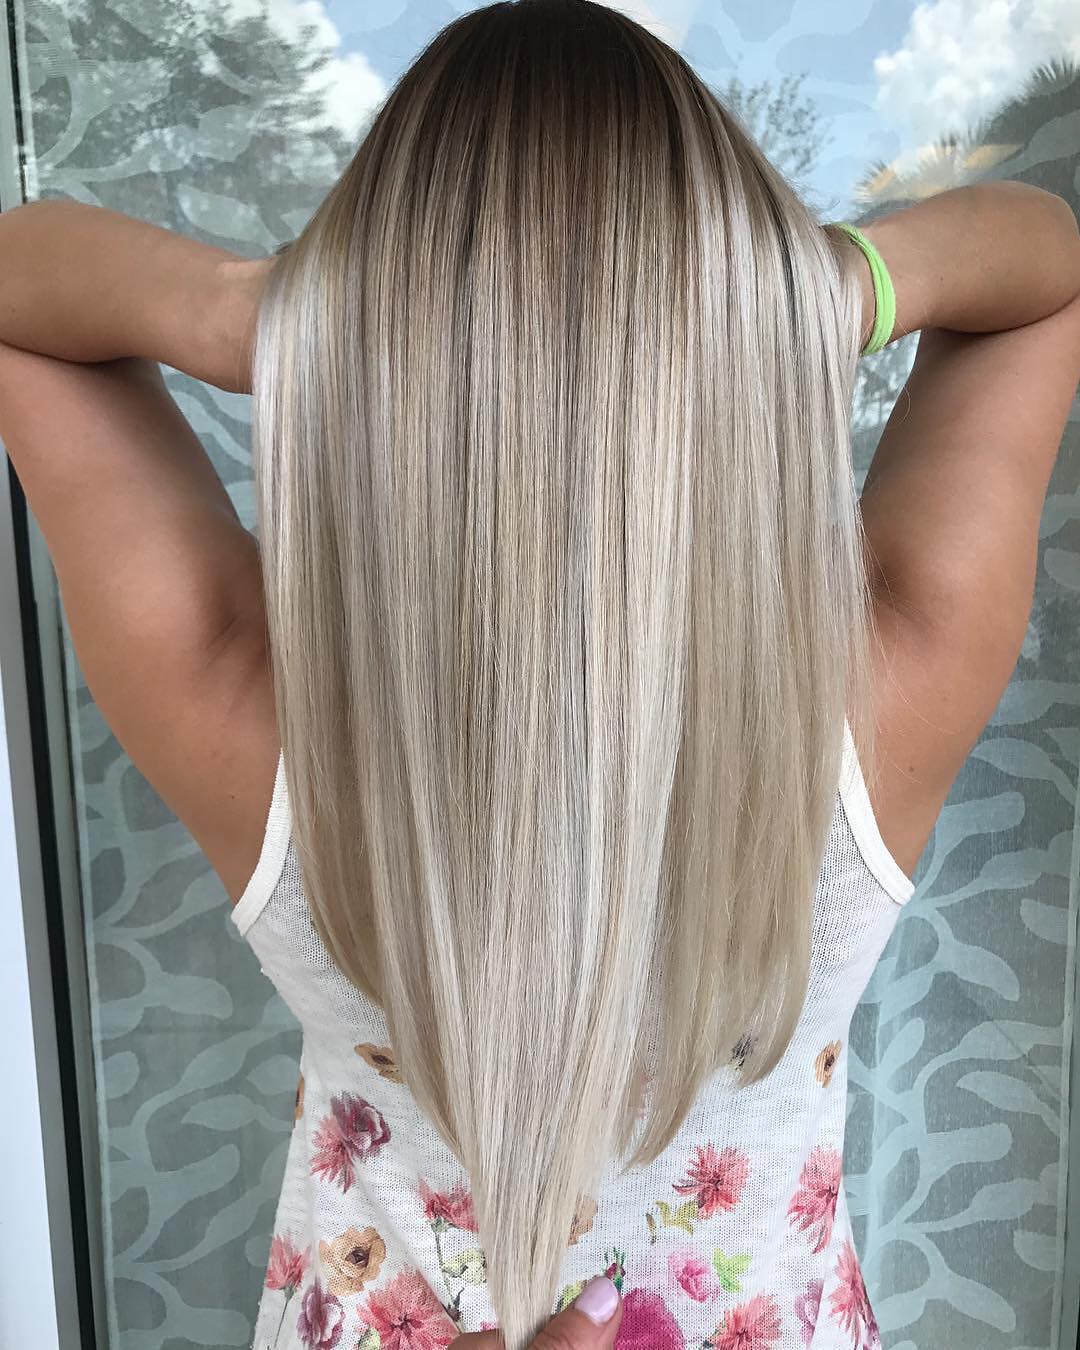 10 Gorgeous Ombre Balayage Hairstyles For Long Hair Hairstyles 2020